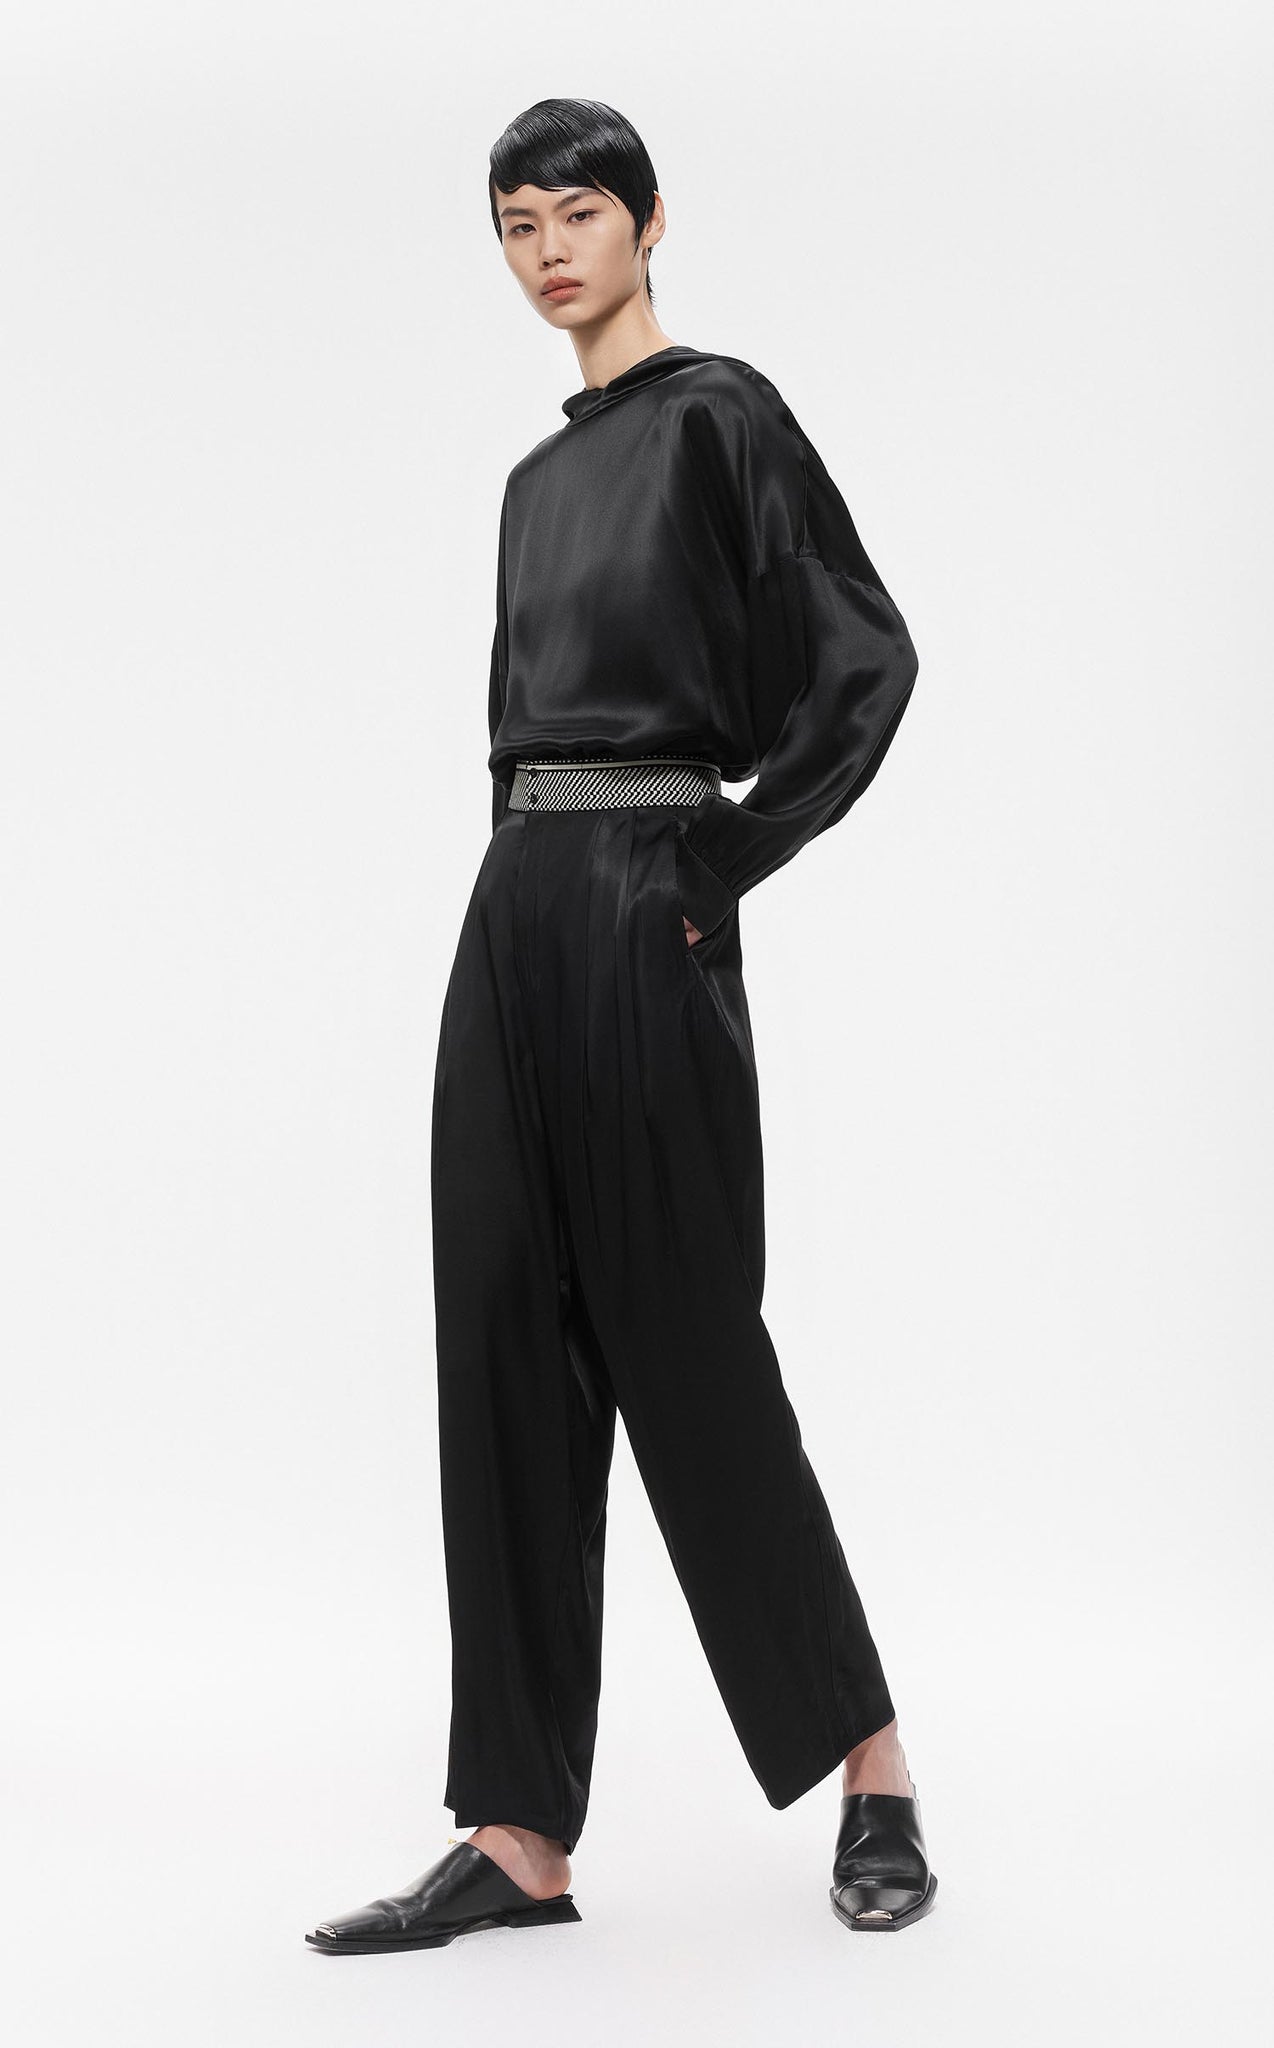 Pants / JNBY Silky Smooth High Rise Casual Trousers